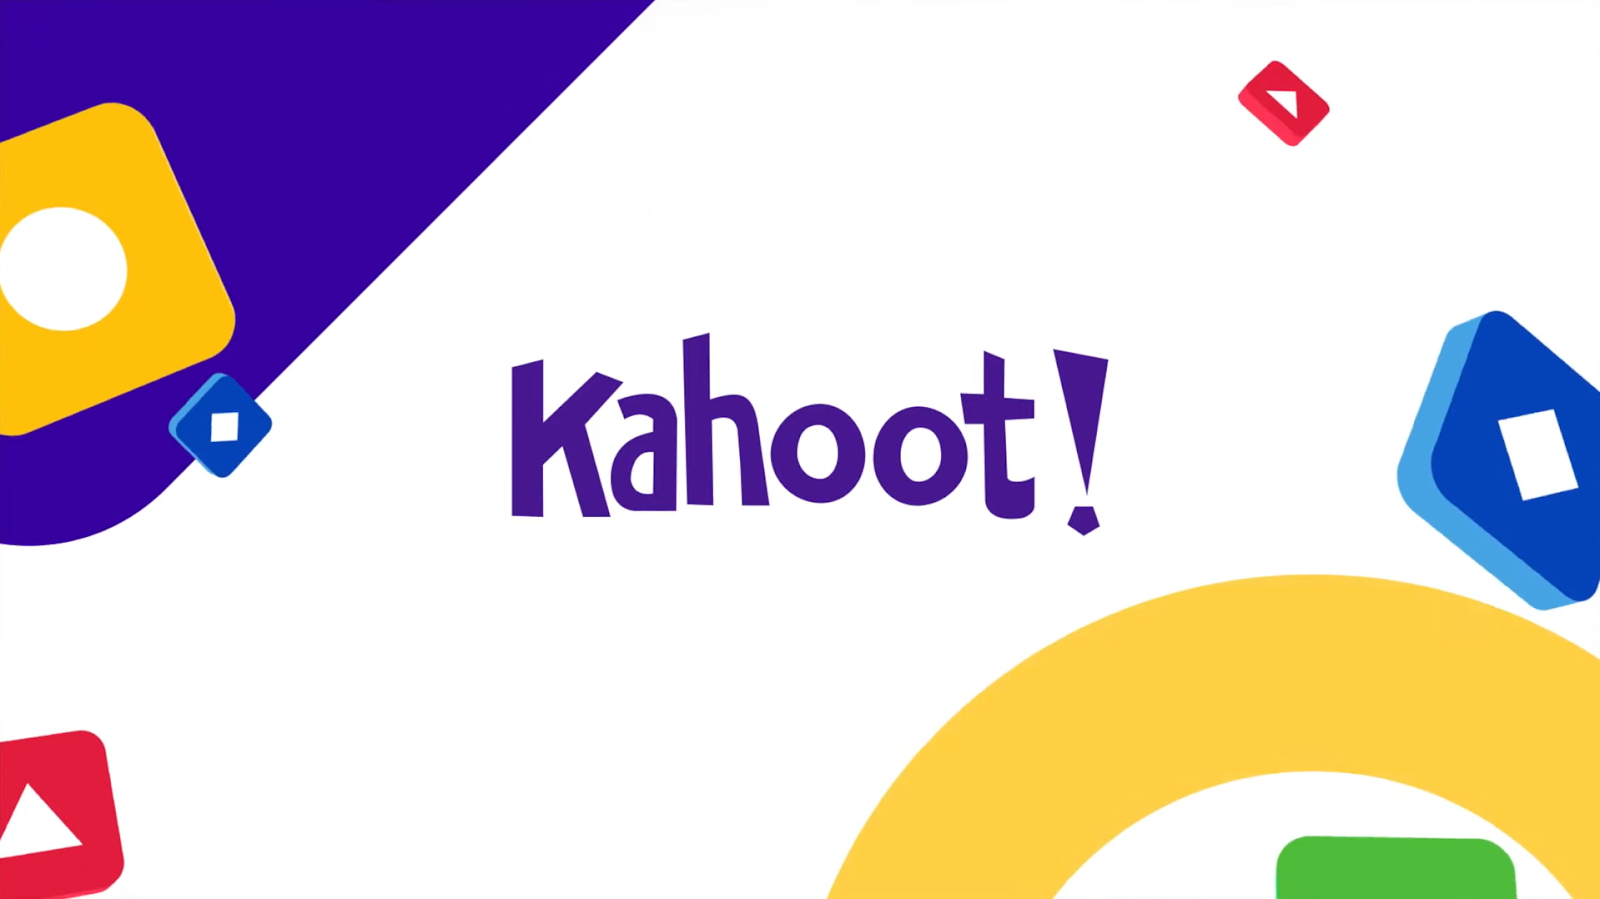 A vibrant Kahoot! logo displayed against a white background with colorful shapes